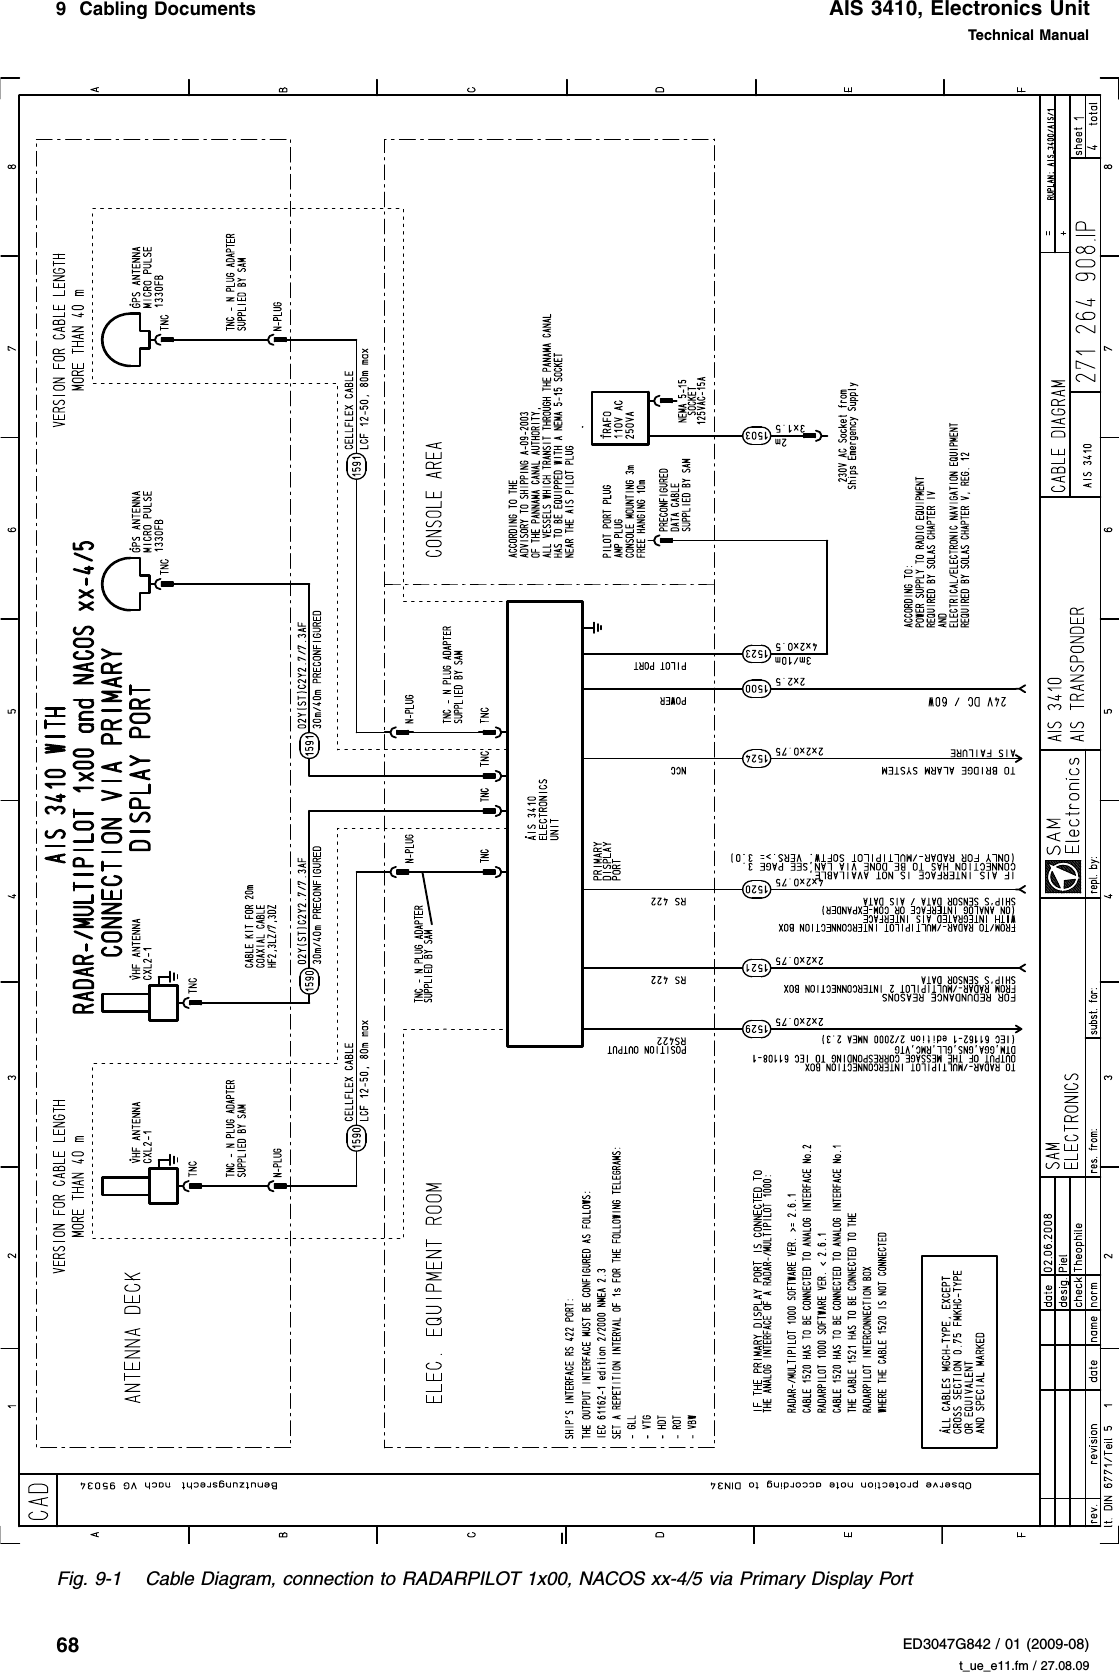 AIS 3410, Electronics UnitED3047G842 / 01 (2009-08)Technical Manual9  Cabling Documents   t_ue_e11.fm / 27.08.0968Fig. 9-1 Cable Diagram, connection to RADARPILOT 1x00, NACOS xx-4/5 via Primary Display Port